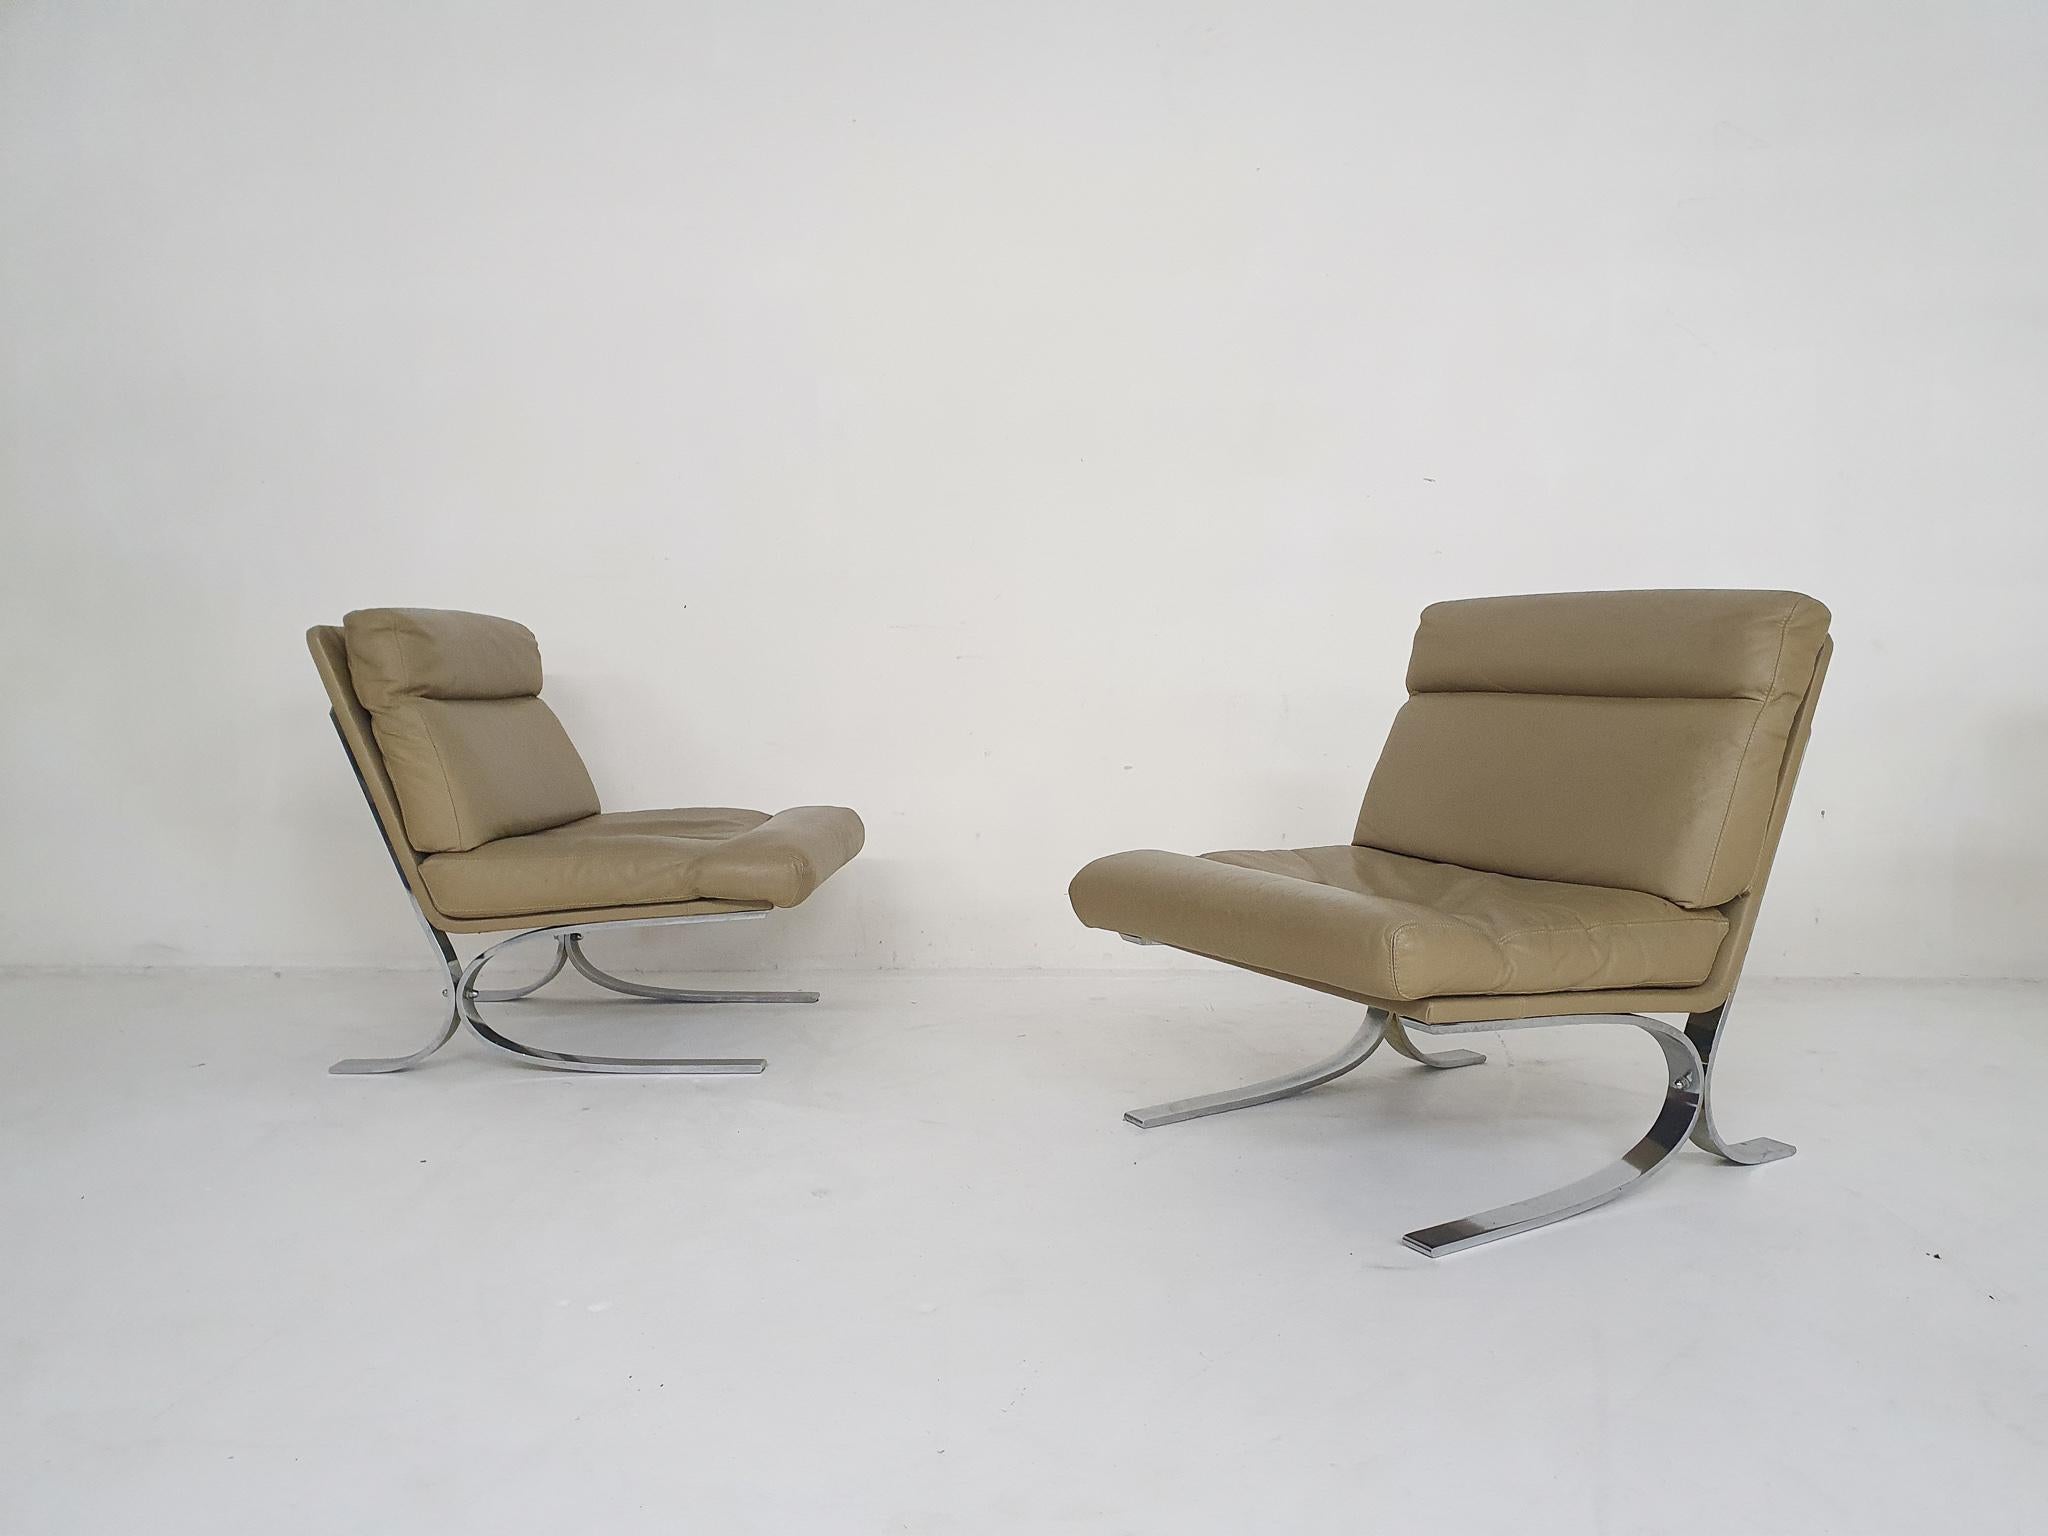 Set of two high quality chromed metal lounge chairs with an off-white or beige leather upholstery.

We think they are designed by Paul Tuttle for Strässle, Switzerland. They chairs are very similar in design to his 